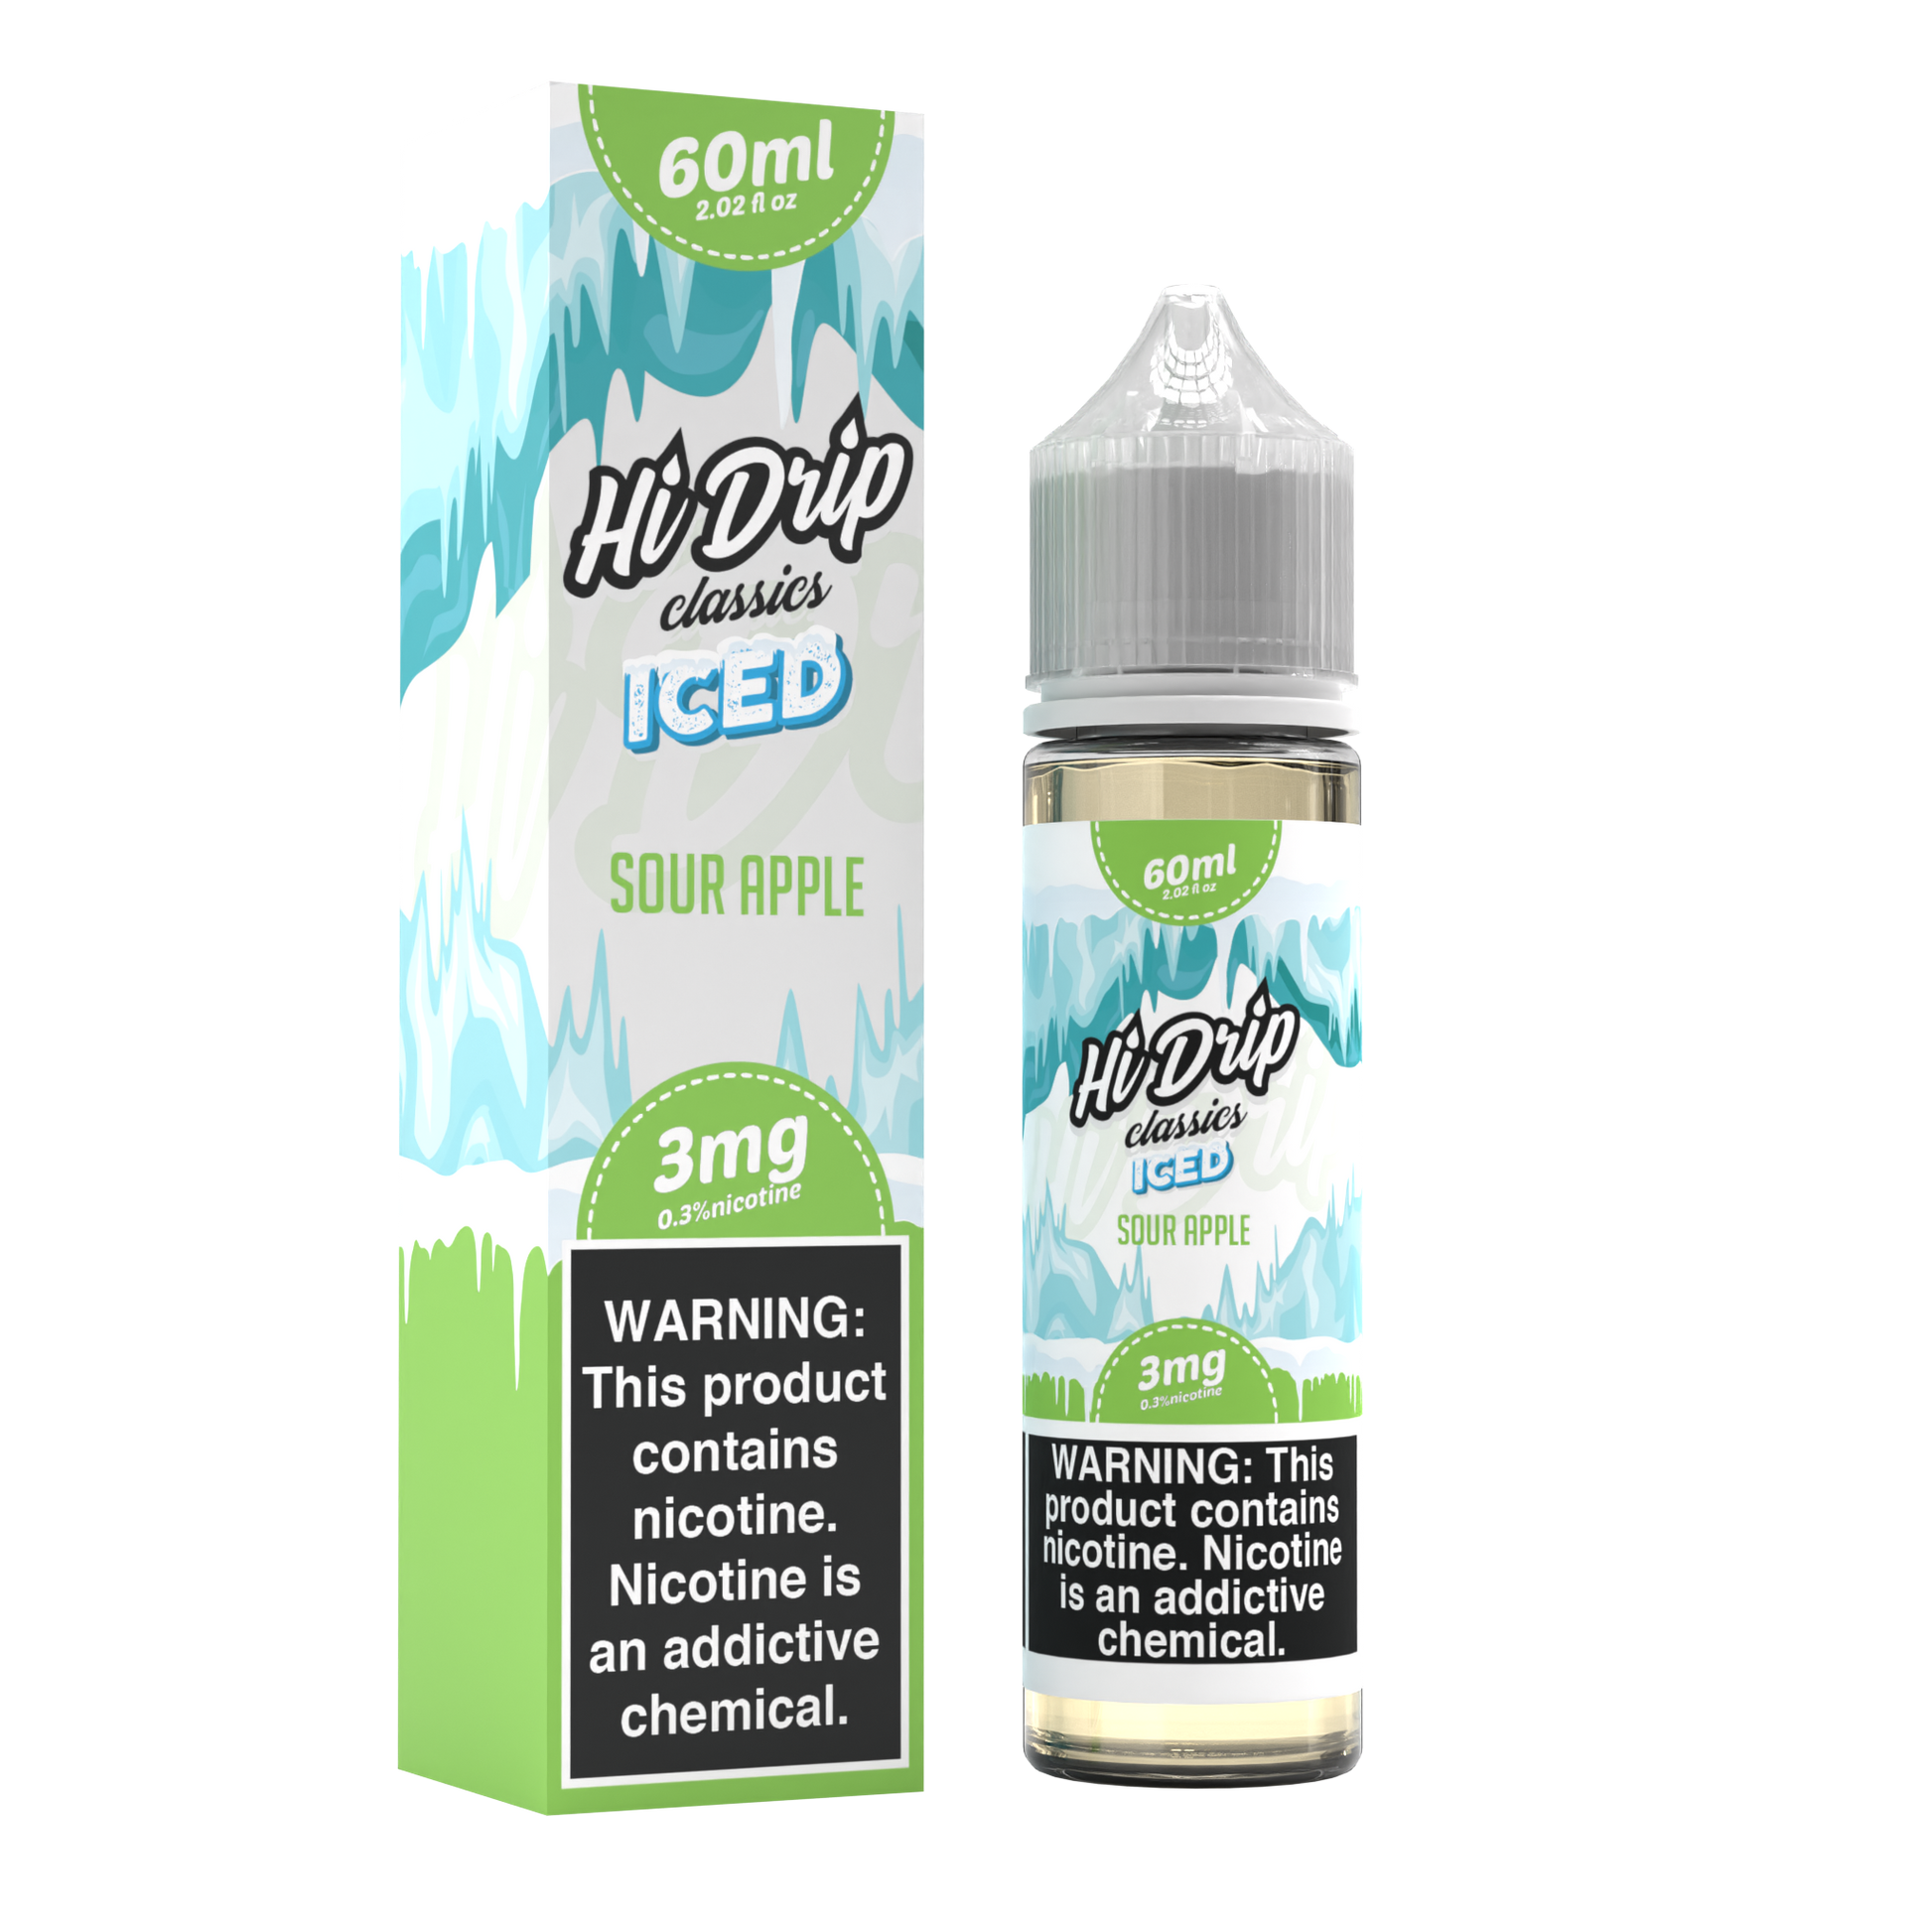 Sour Apple Iced by Hi-Drip Classics Series 60mL with Packaging